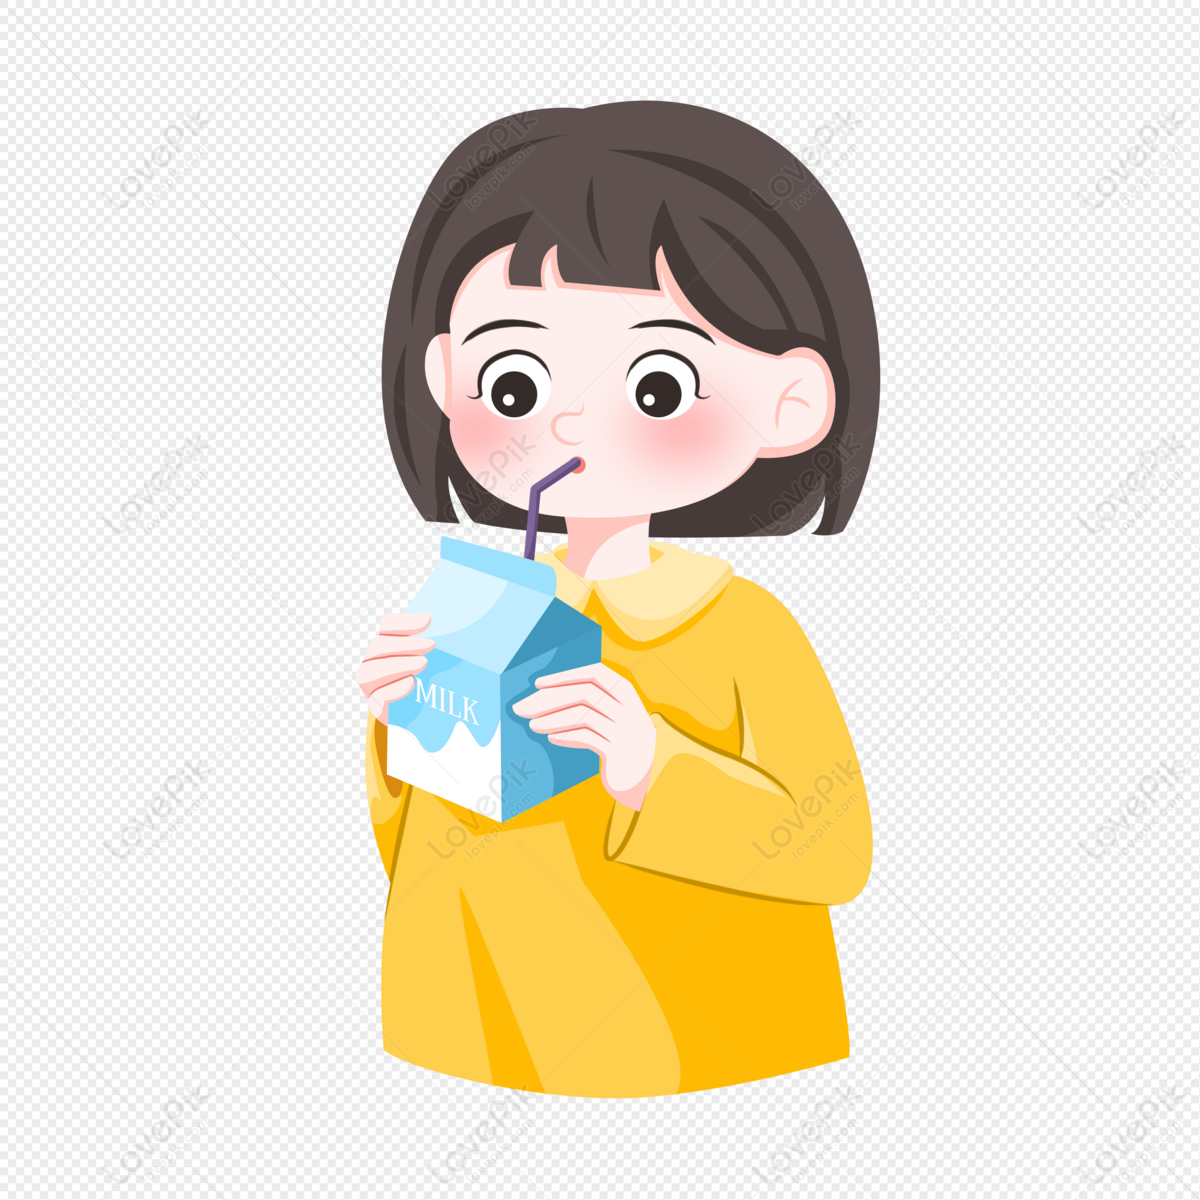 World Milk Day Drinking Milk Girl Free PNG And Clipart Image For Free  Download - Lovepik | 401928389